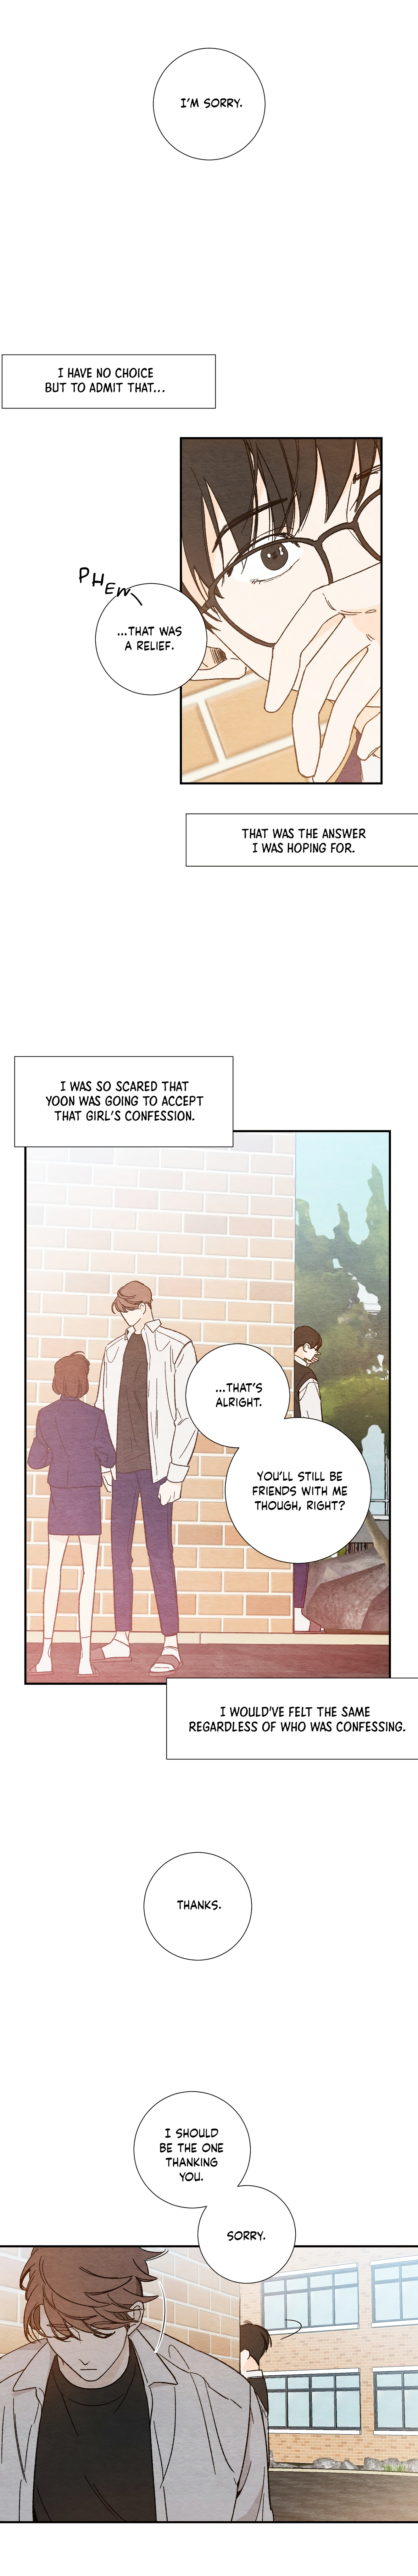 Law Of First Love - Page 3